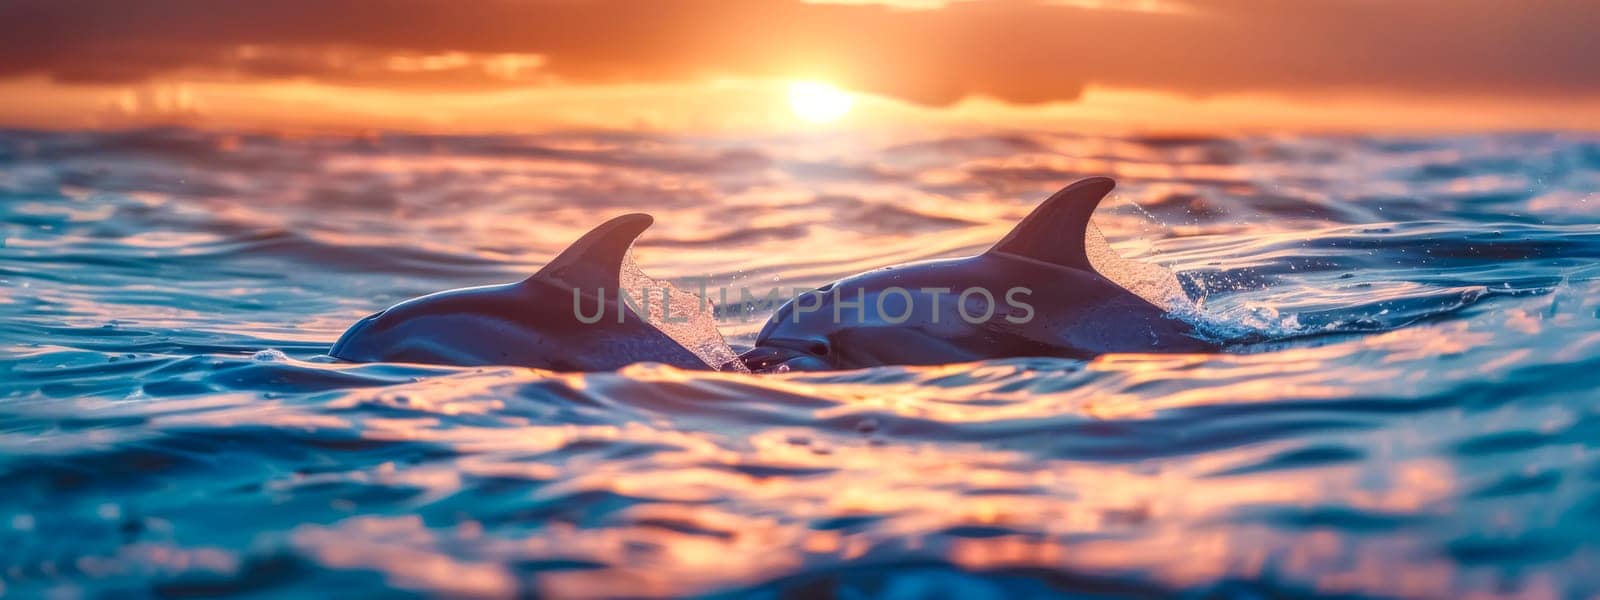 Two dolphins emerge at sunset, with golden light reflecting off the ocean's surface